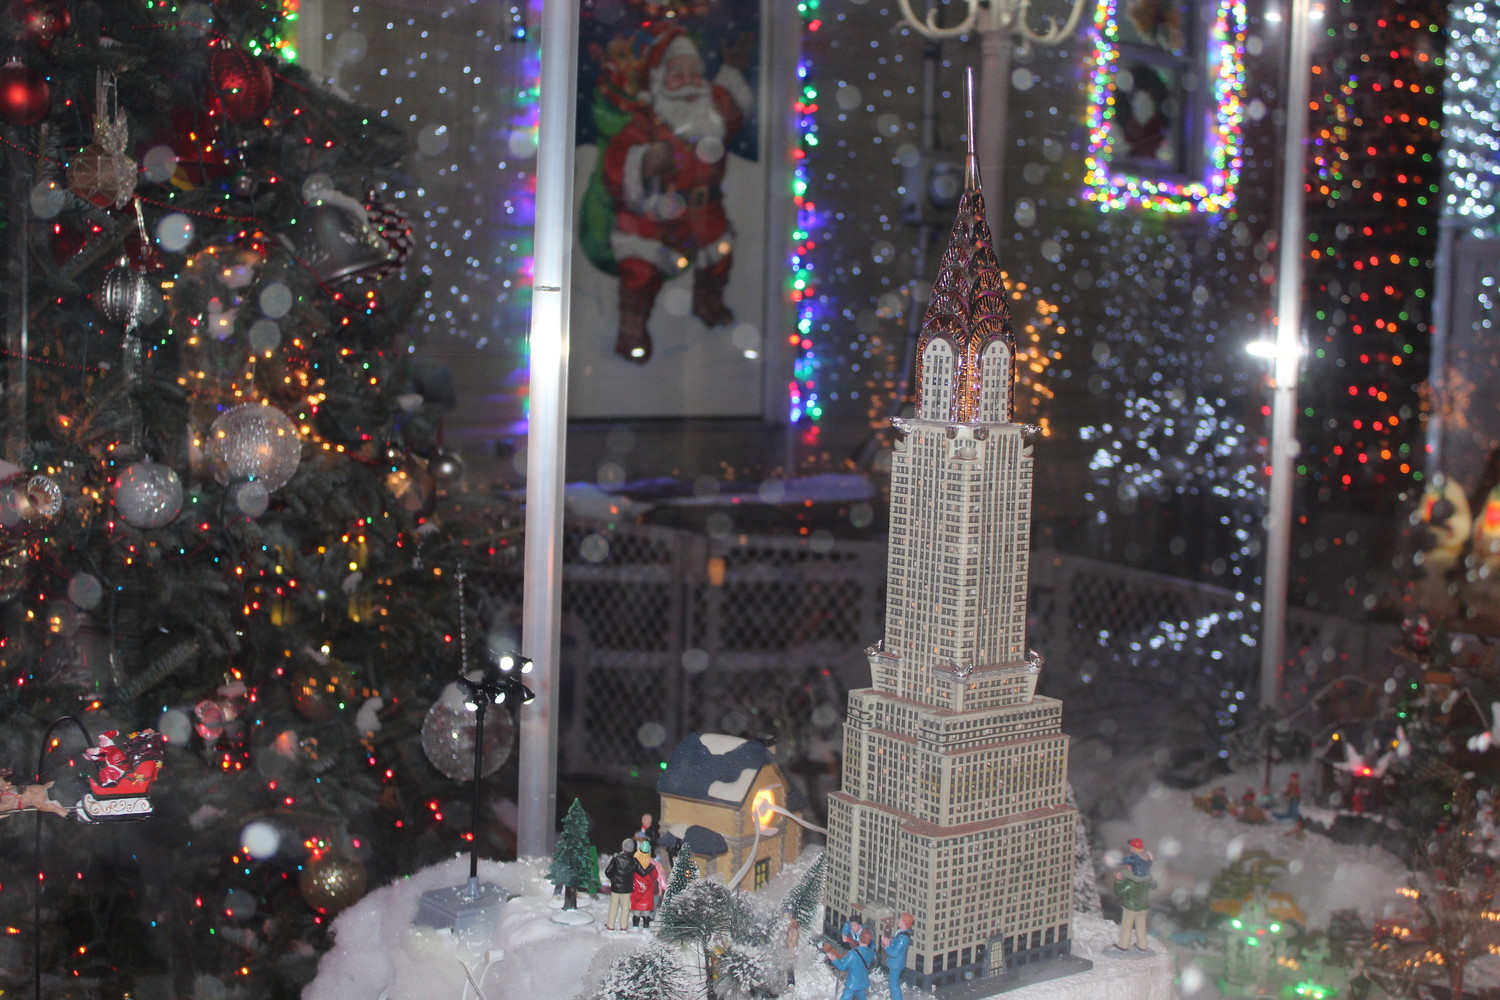 Perez made miniature scenes, including one featuring the Empire State Building.